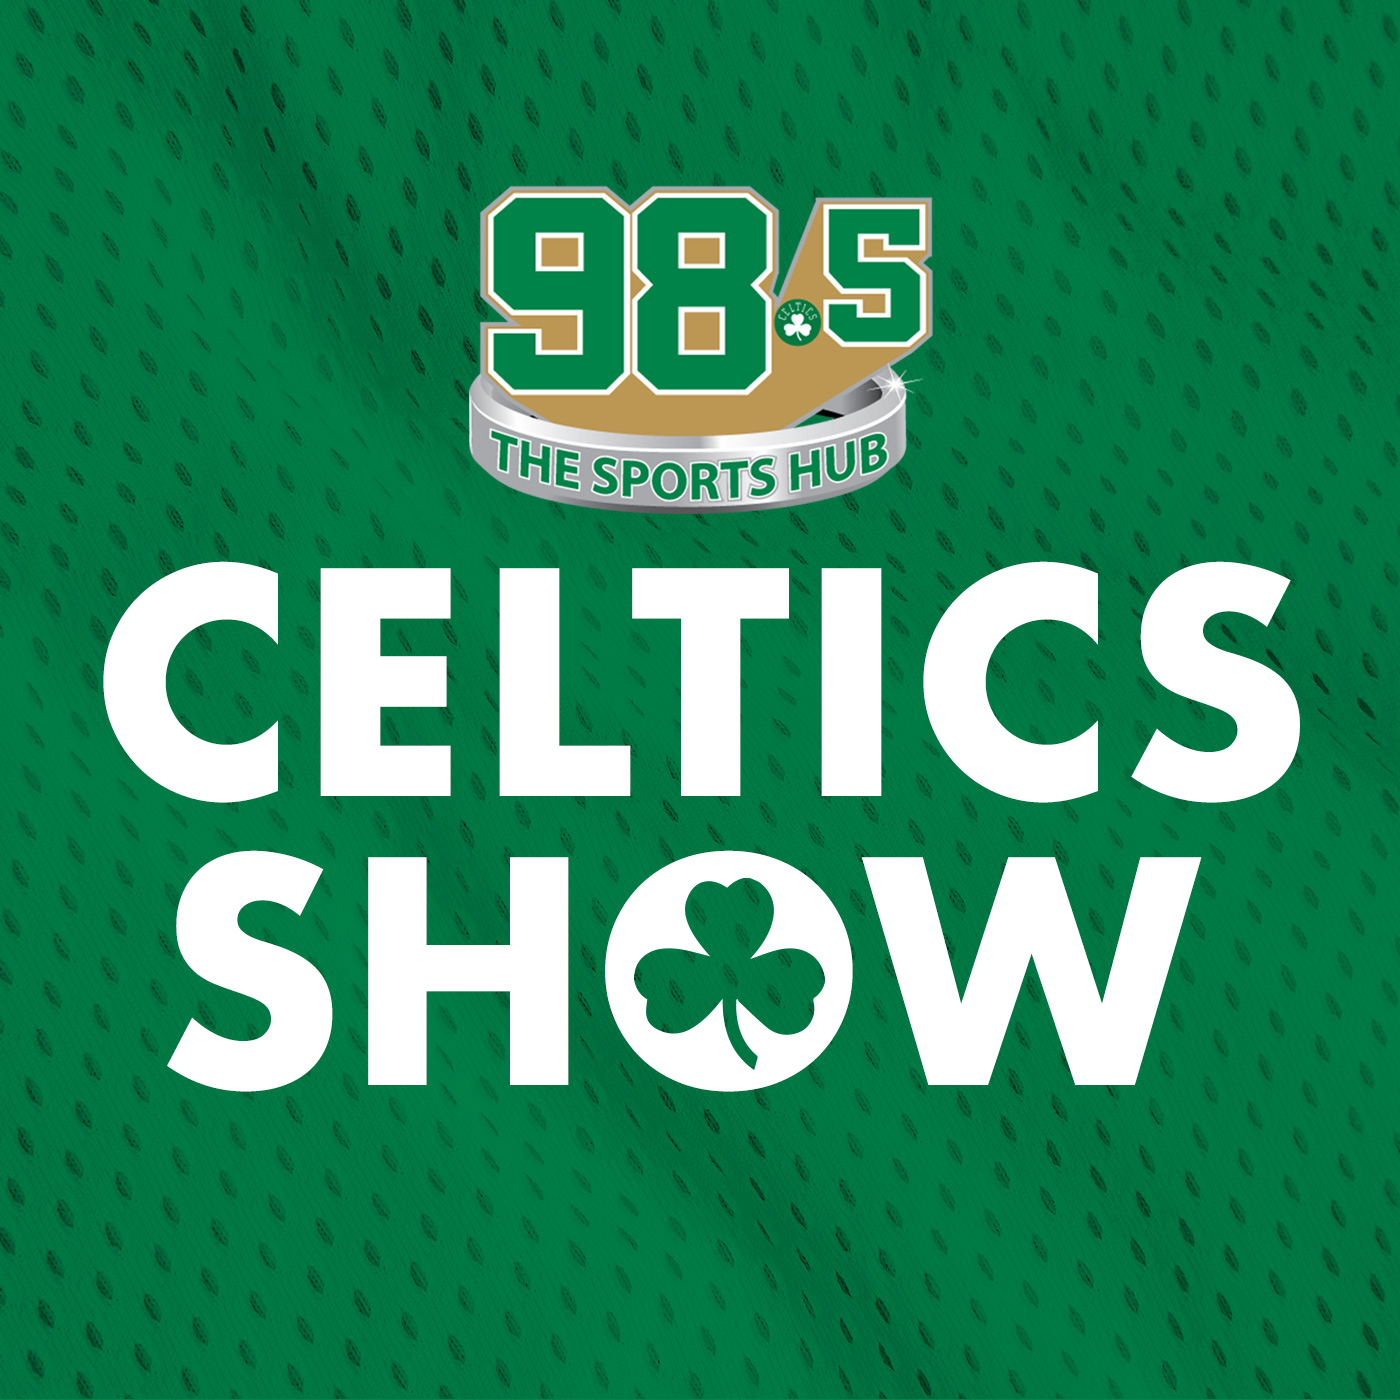 Brown Living up to The Contract? // Chris Forsberg Joins The Show // Should Celtics be Title Favorites? - 3/16